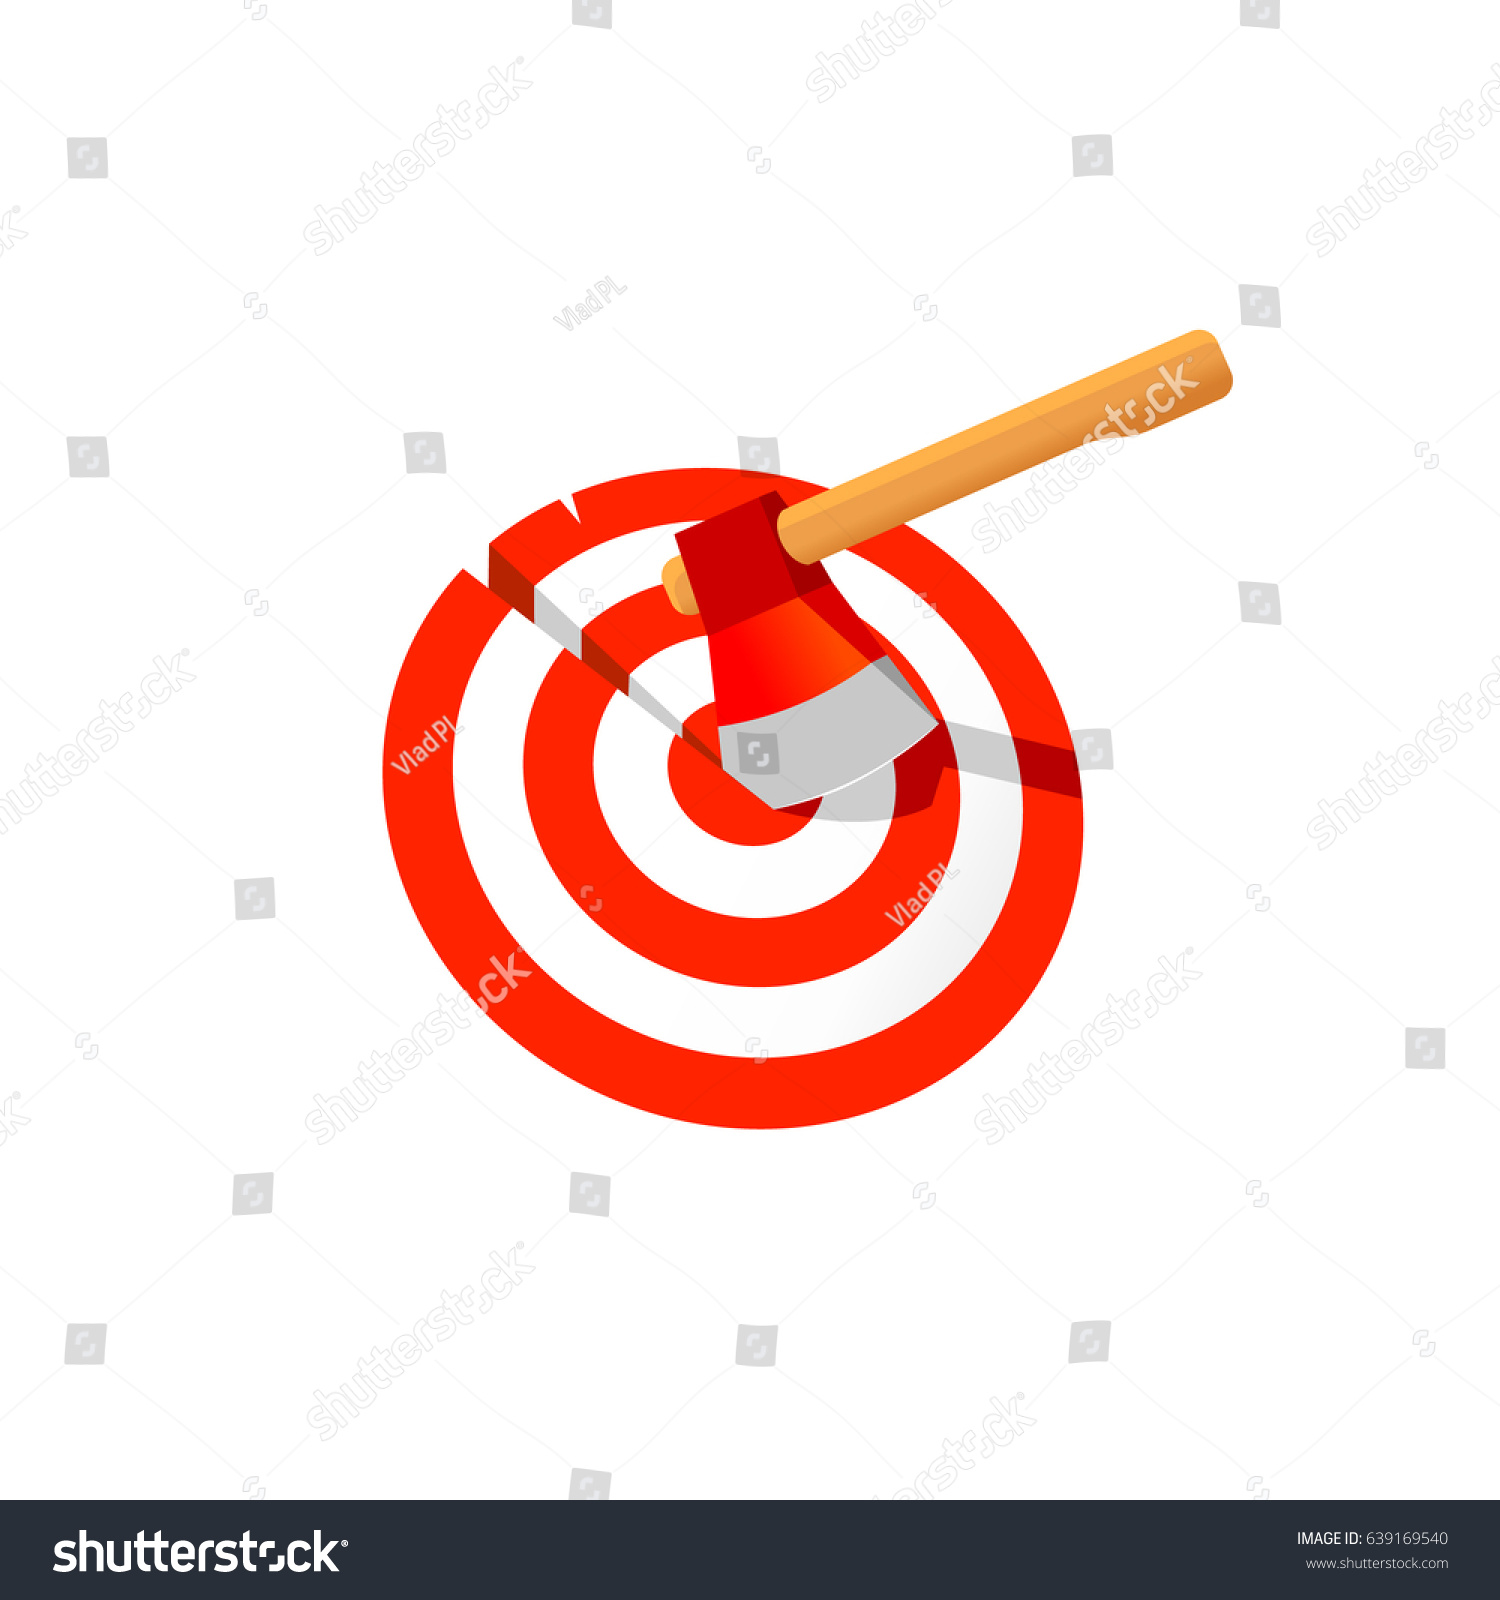 SVG of Target and Axe Vector Illustration. svg